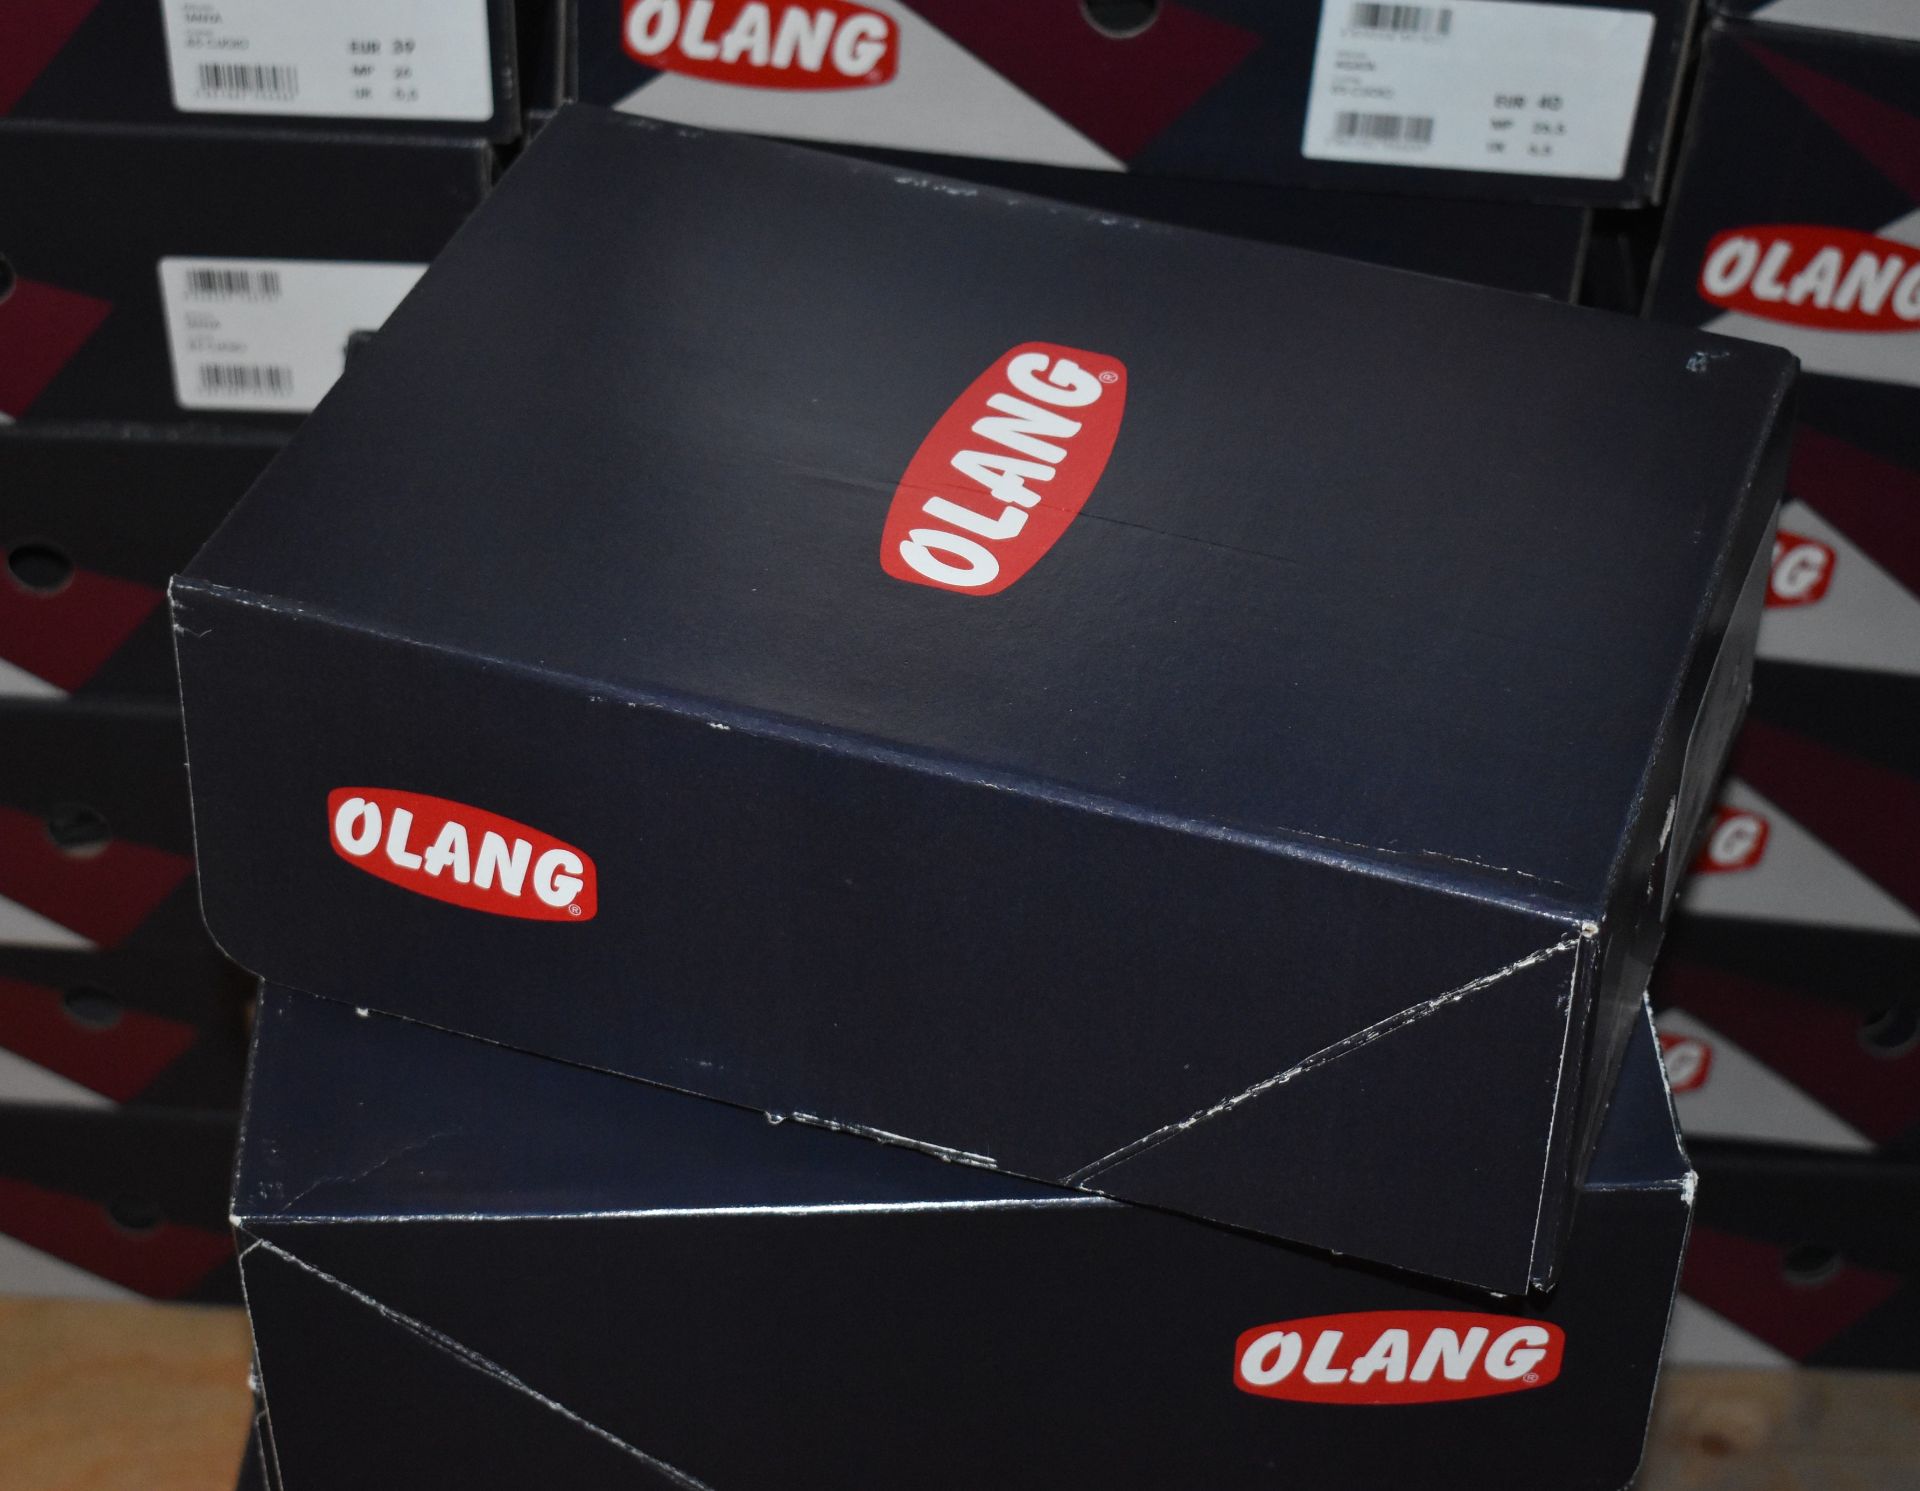 1 x Pair of Designer Olang Merano 82 Blu Women's Winter Boots - Euro Size 39 - Brand New Boxed Stock - Image 3 of 4